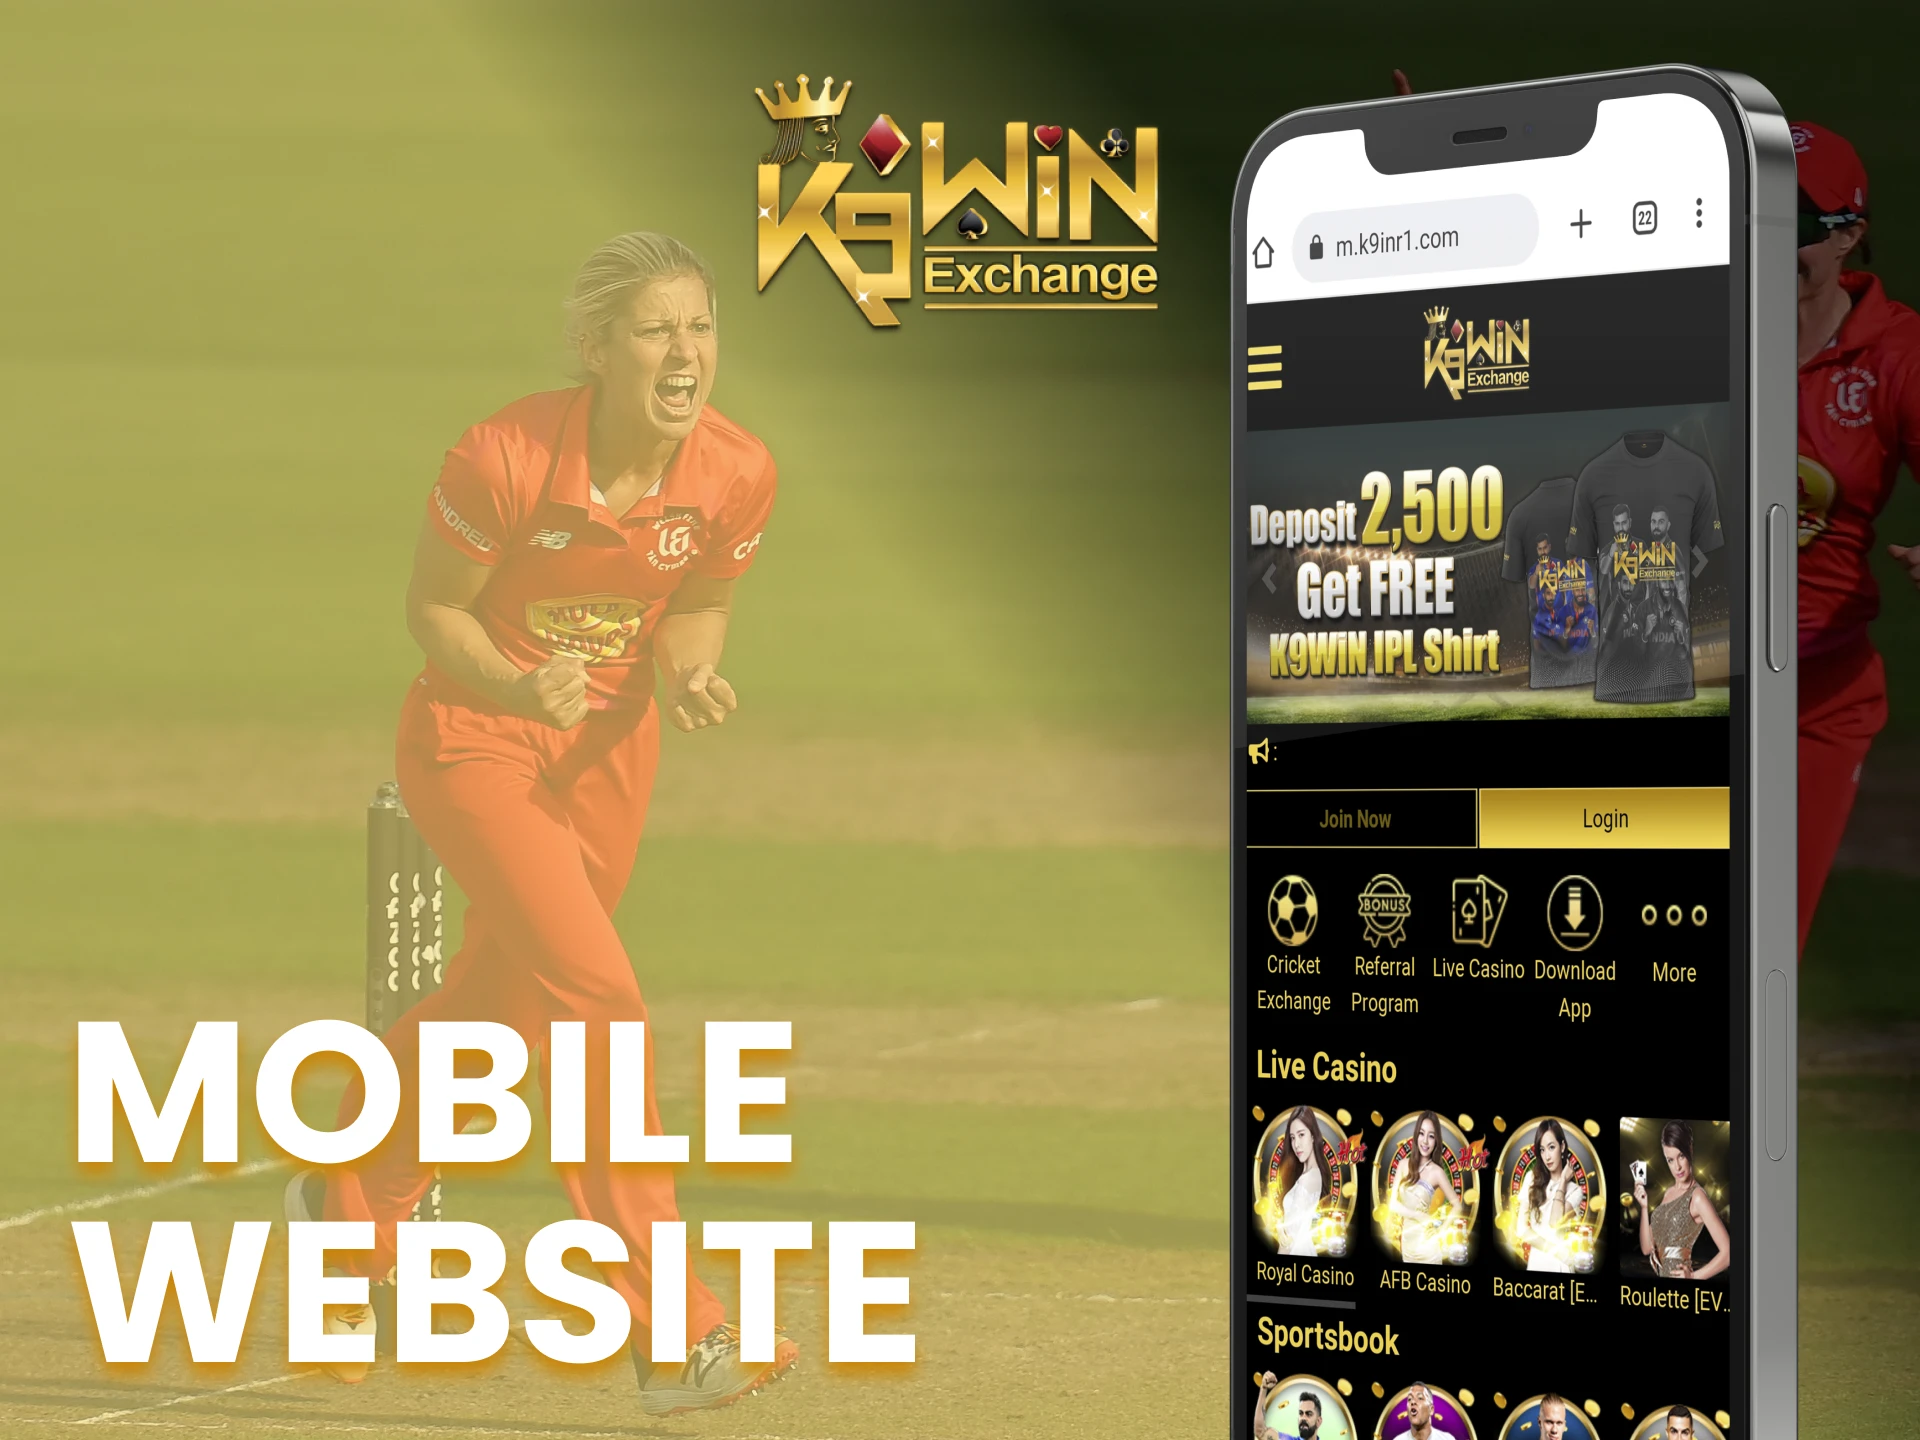 You can use the K9Win website on any mobile device.